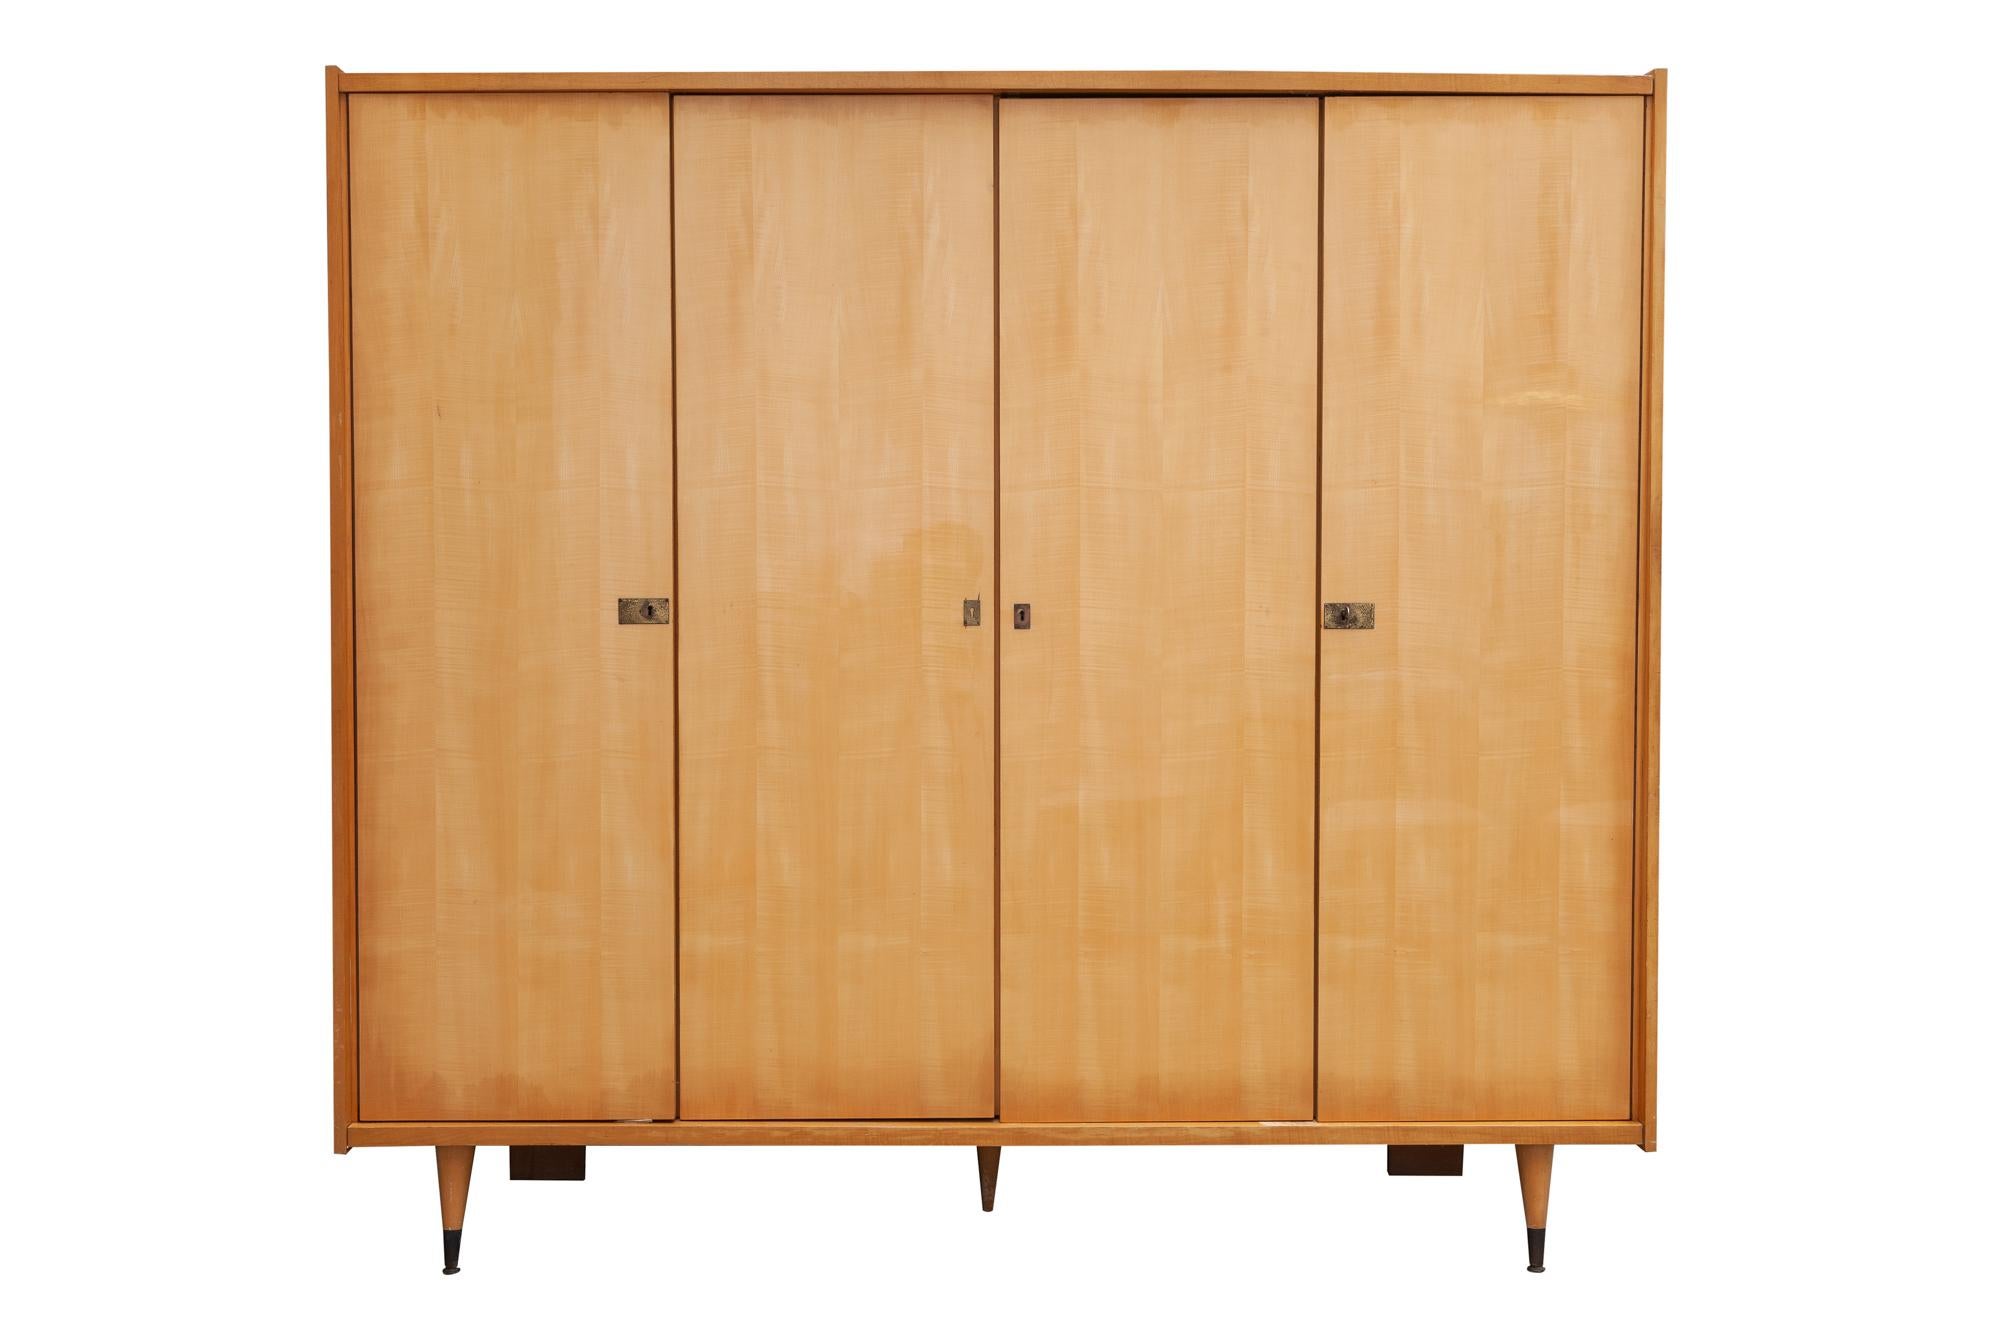 1950s wardrobe, France. Glossy blonde wood with four doors with key and brass-capped spindle feet. Hanging space in every compartment. Easily assembled or disassembled with screw lock clips.
Add a touch of charm and elegance to your home with this